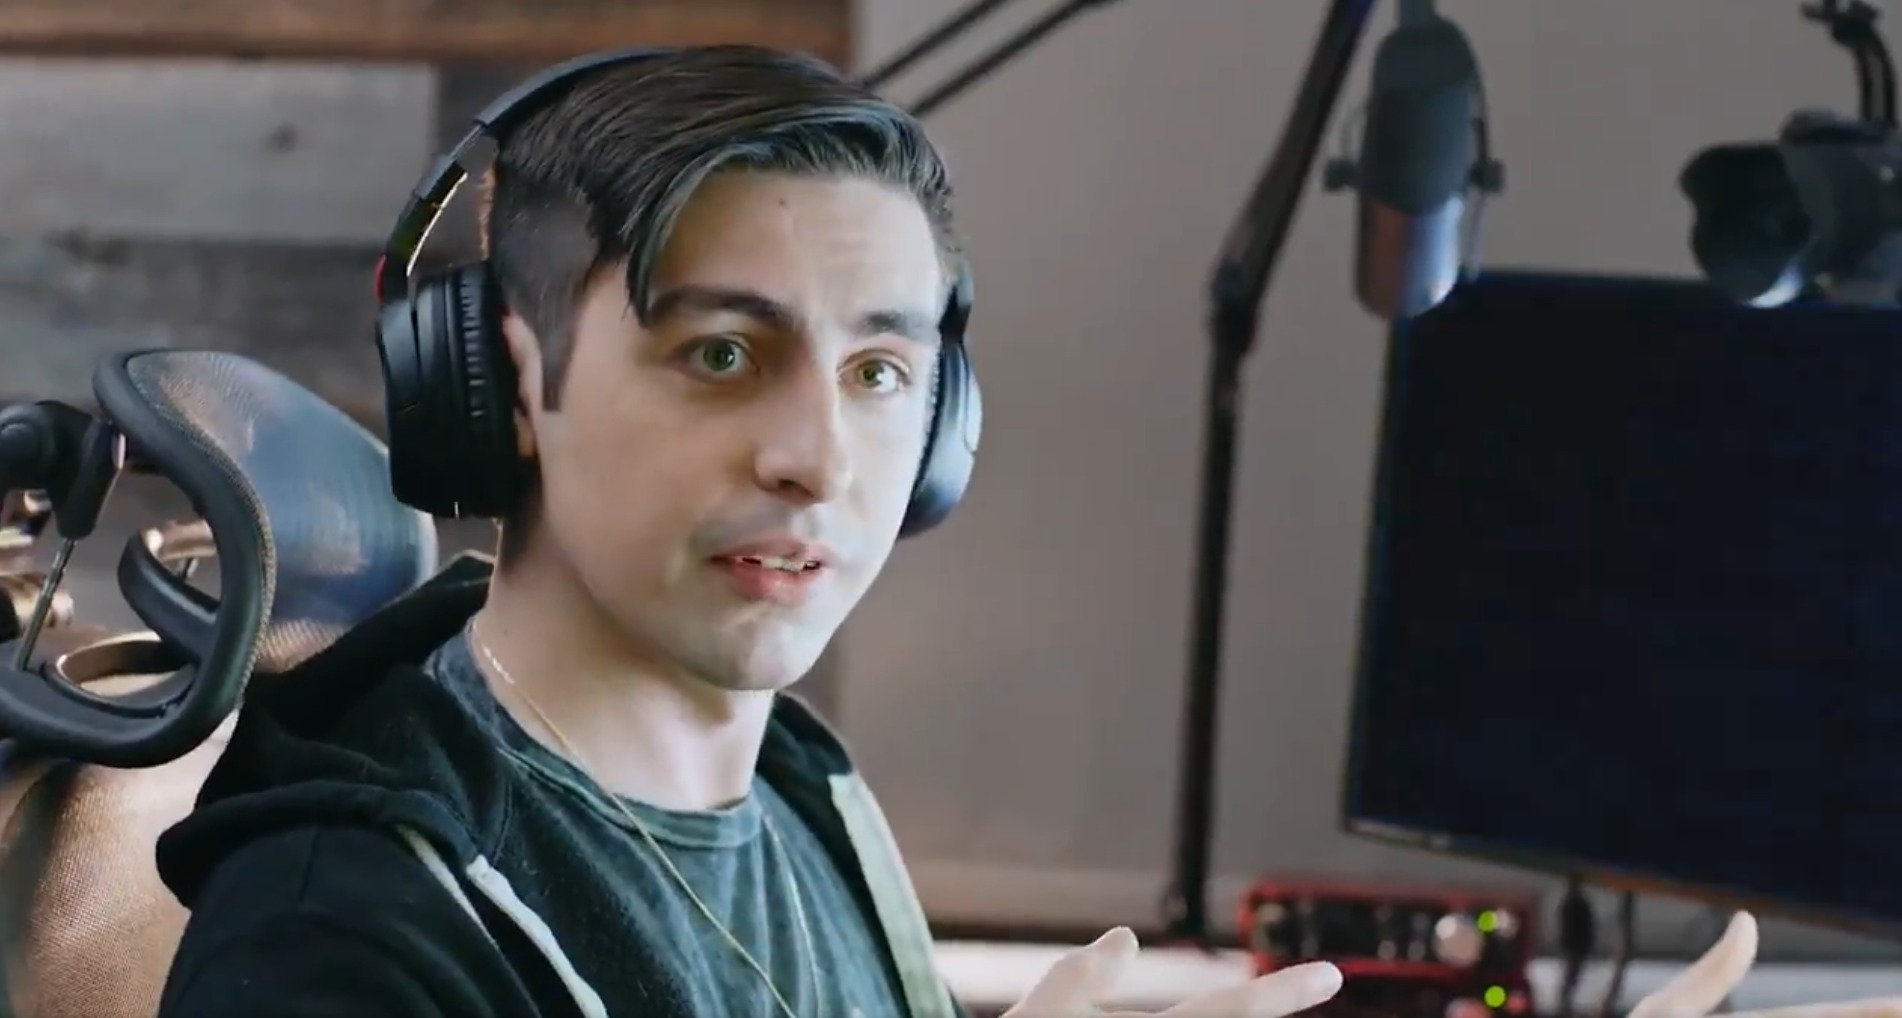 Shroud has returned to Twitch following an '$10m' Mixer payoff VGC